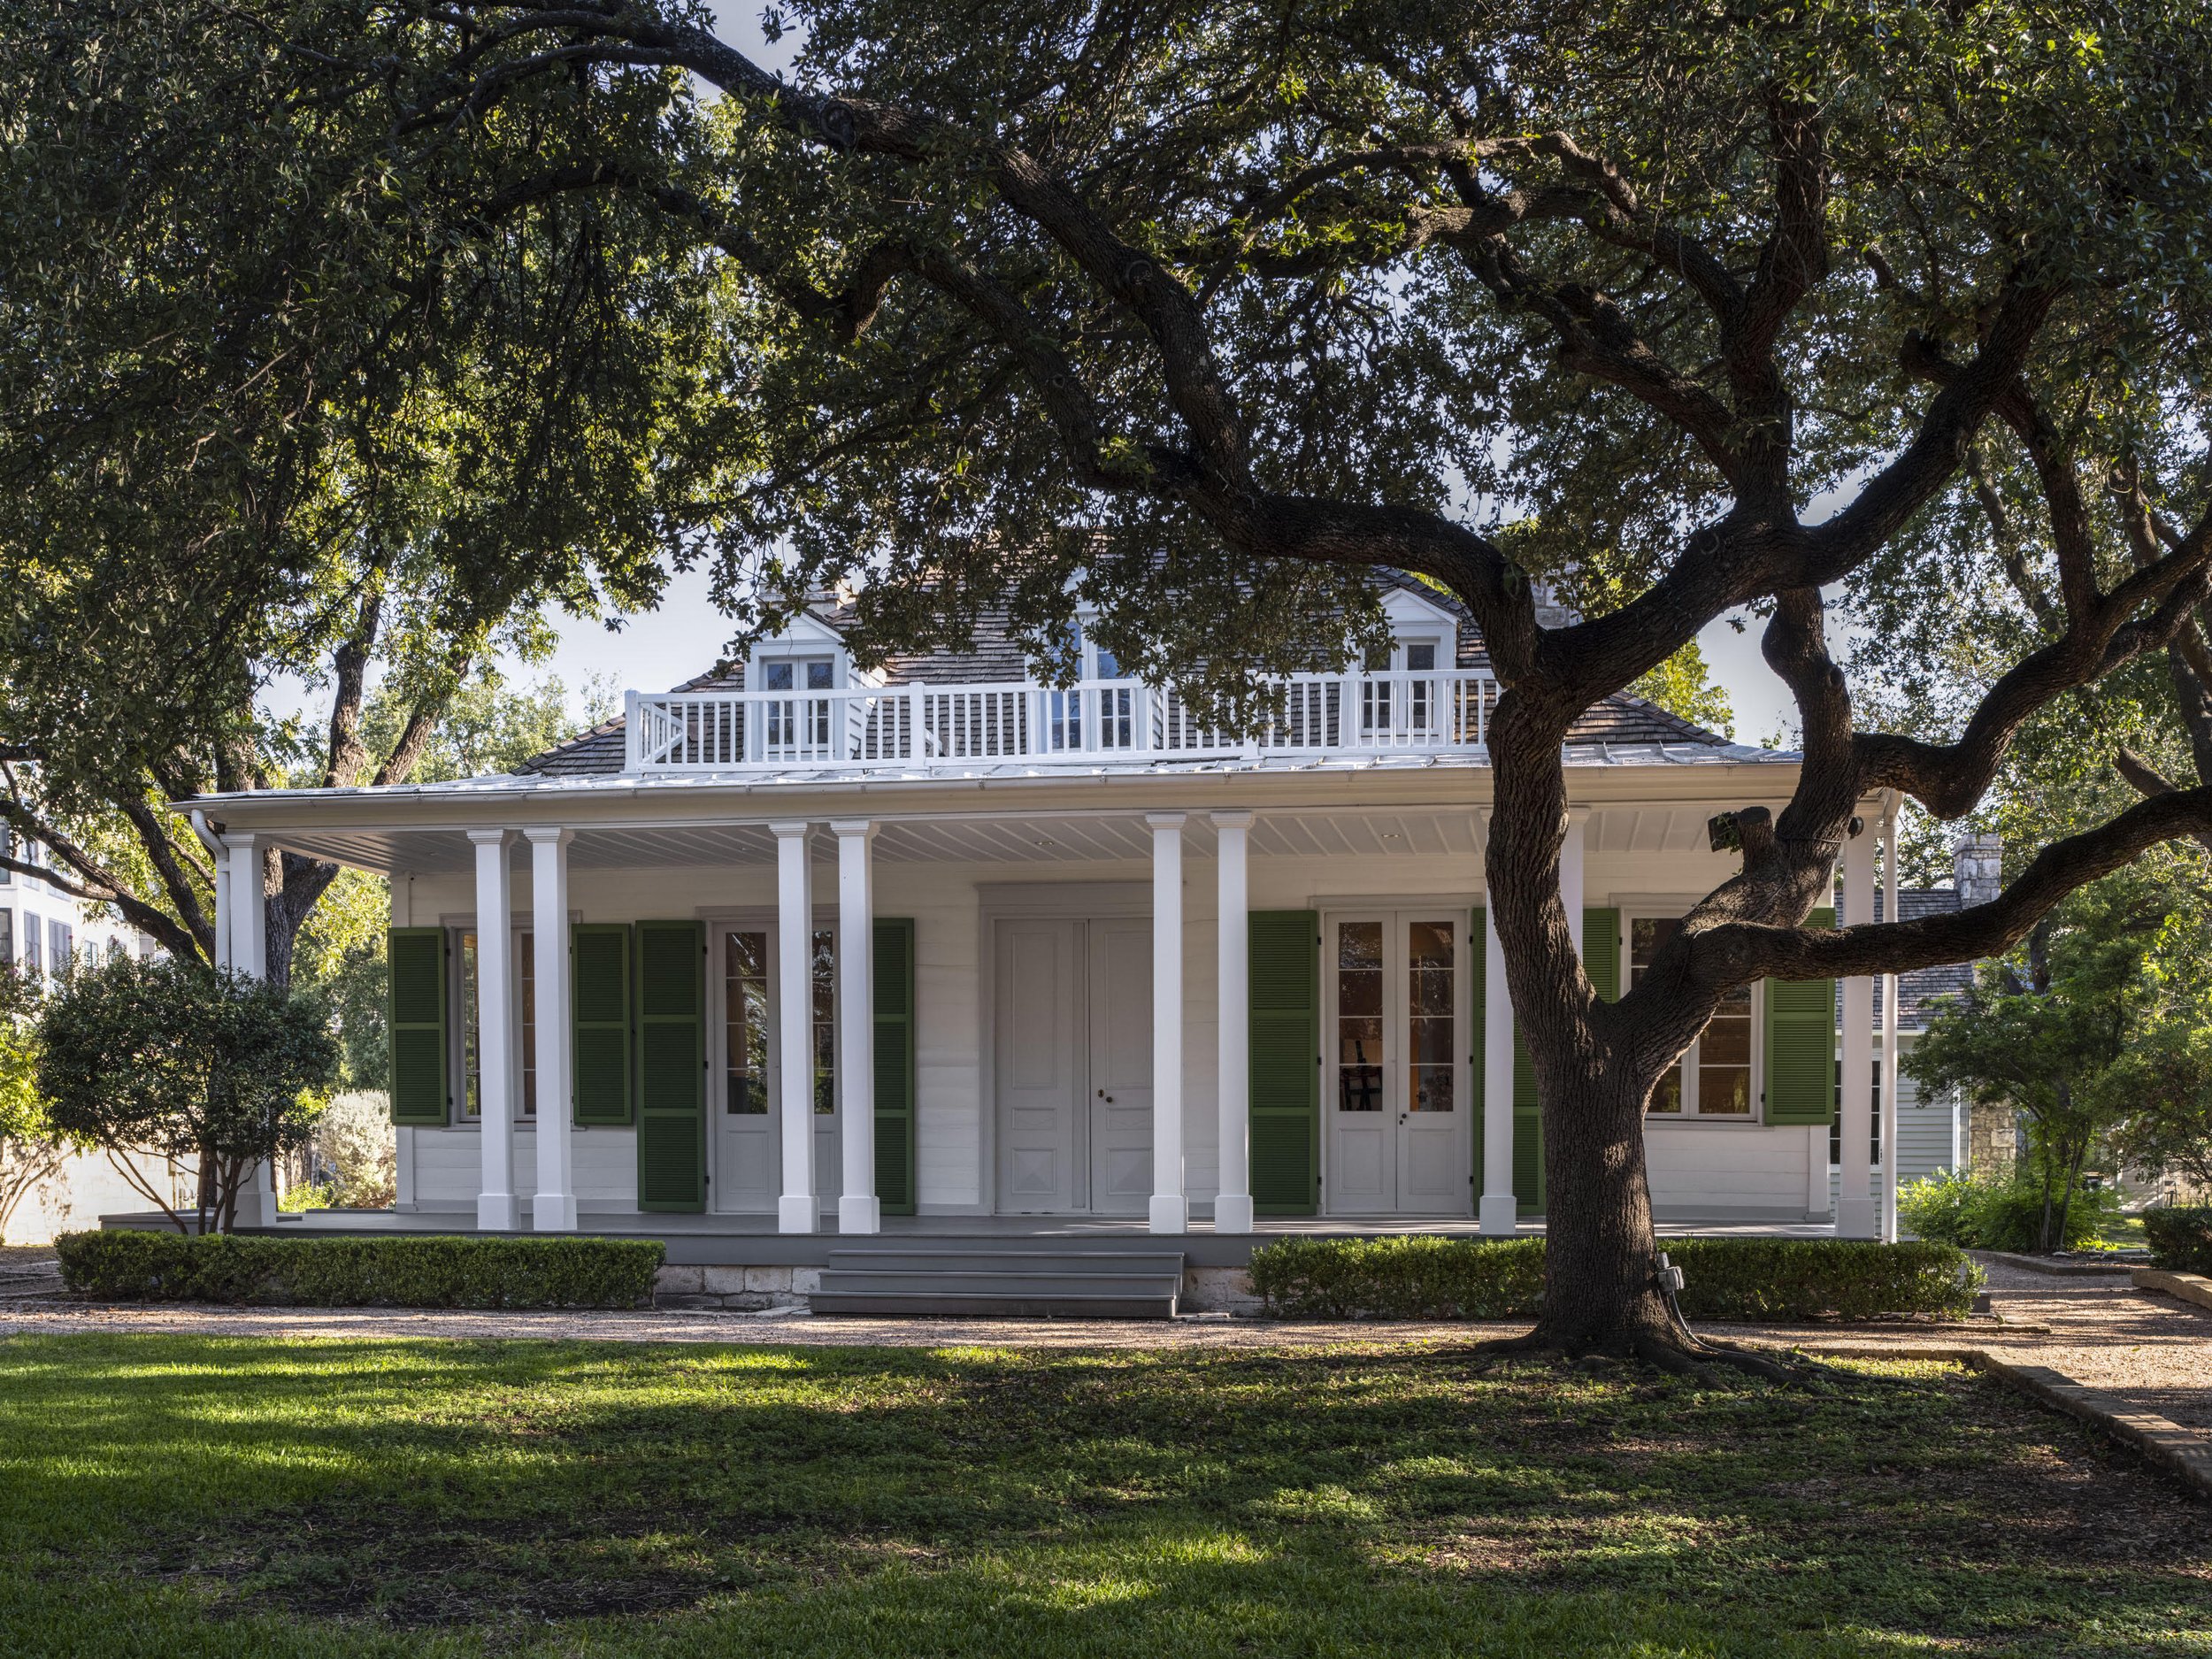   FRENCH LEGATION  Recipient: Texas Historical Commission  Preservation Award for Restoration   Photo: Brian Mihealsick 